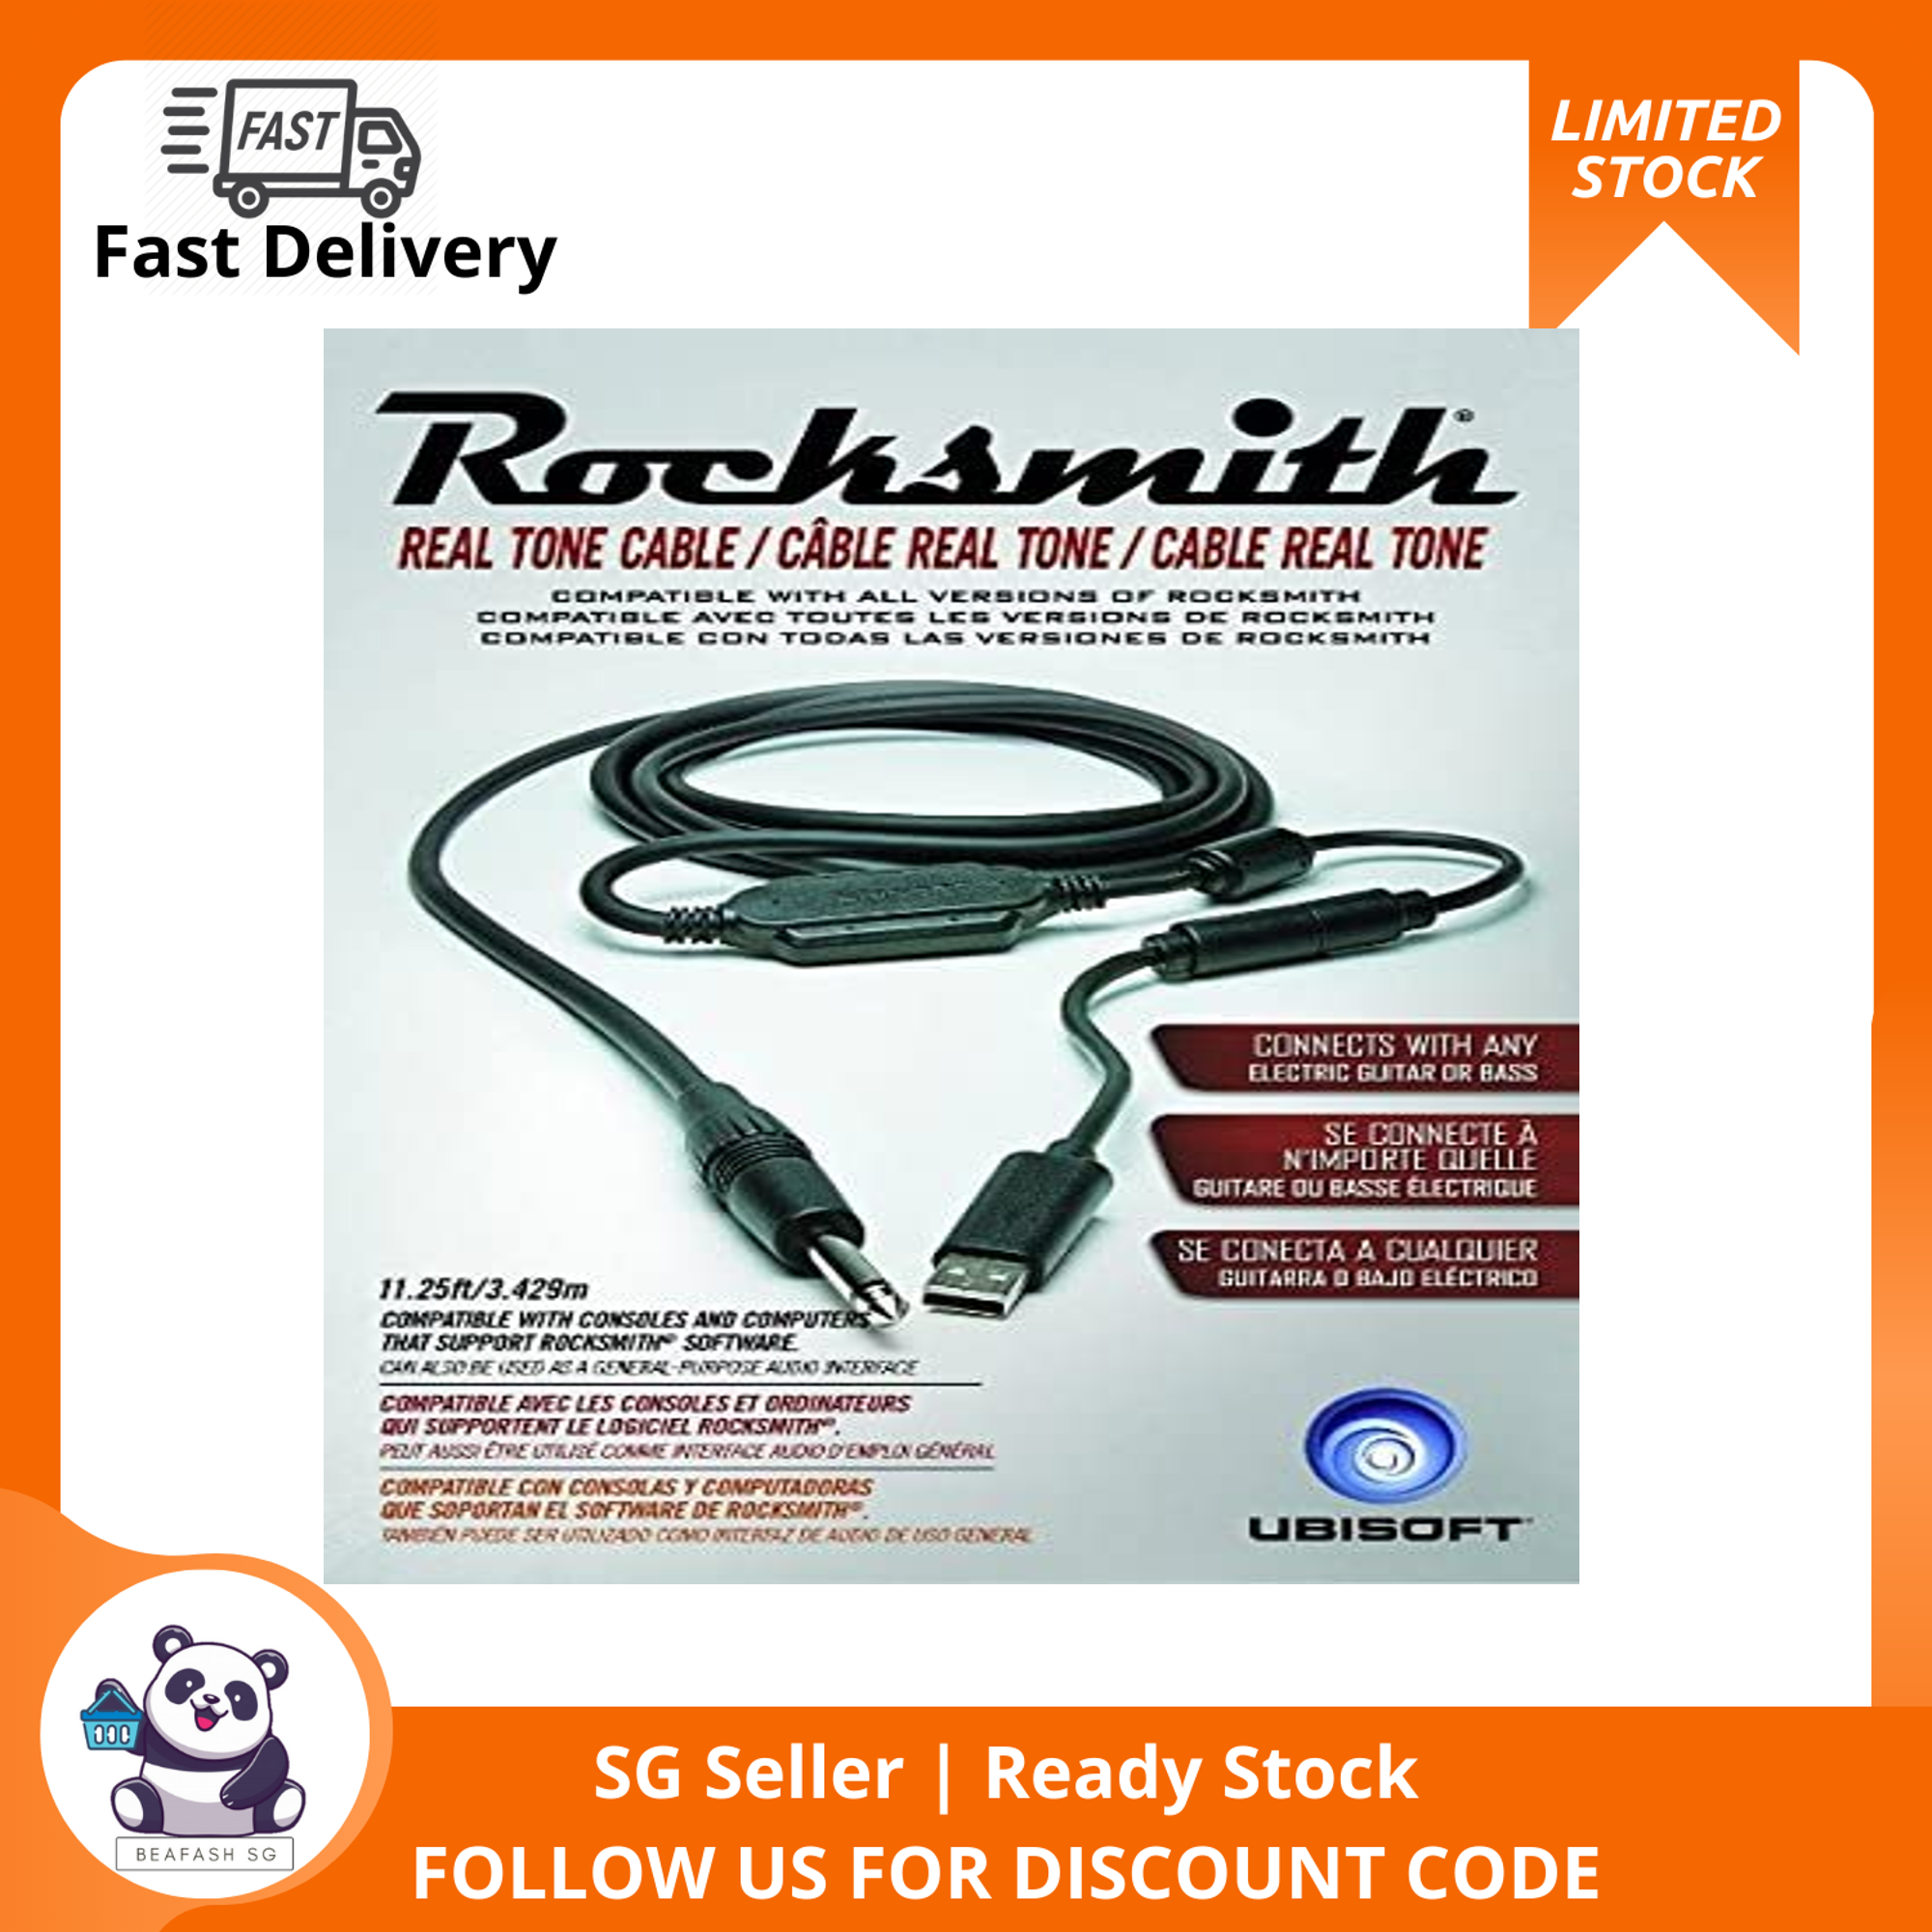 Persuasion kompliceret Withered SG INSTOCK)Rocksmith 2014 Real Tone Cable Trilingual | Lazada Singapore